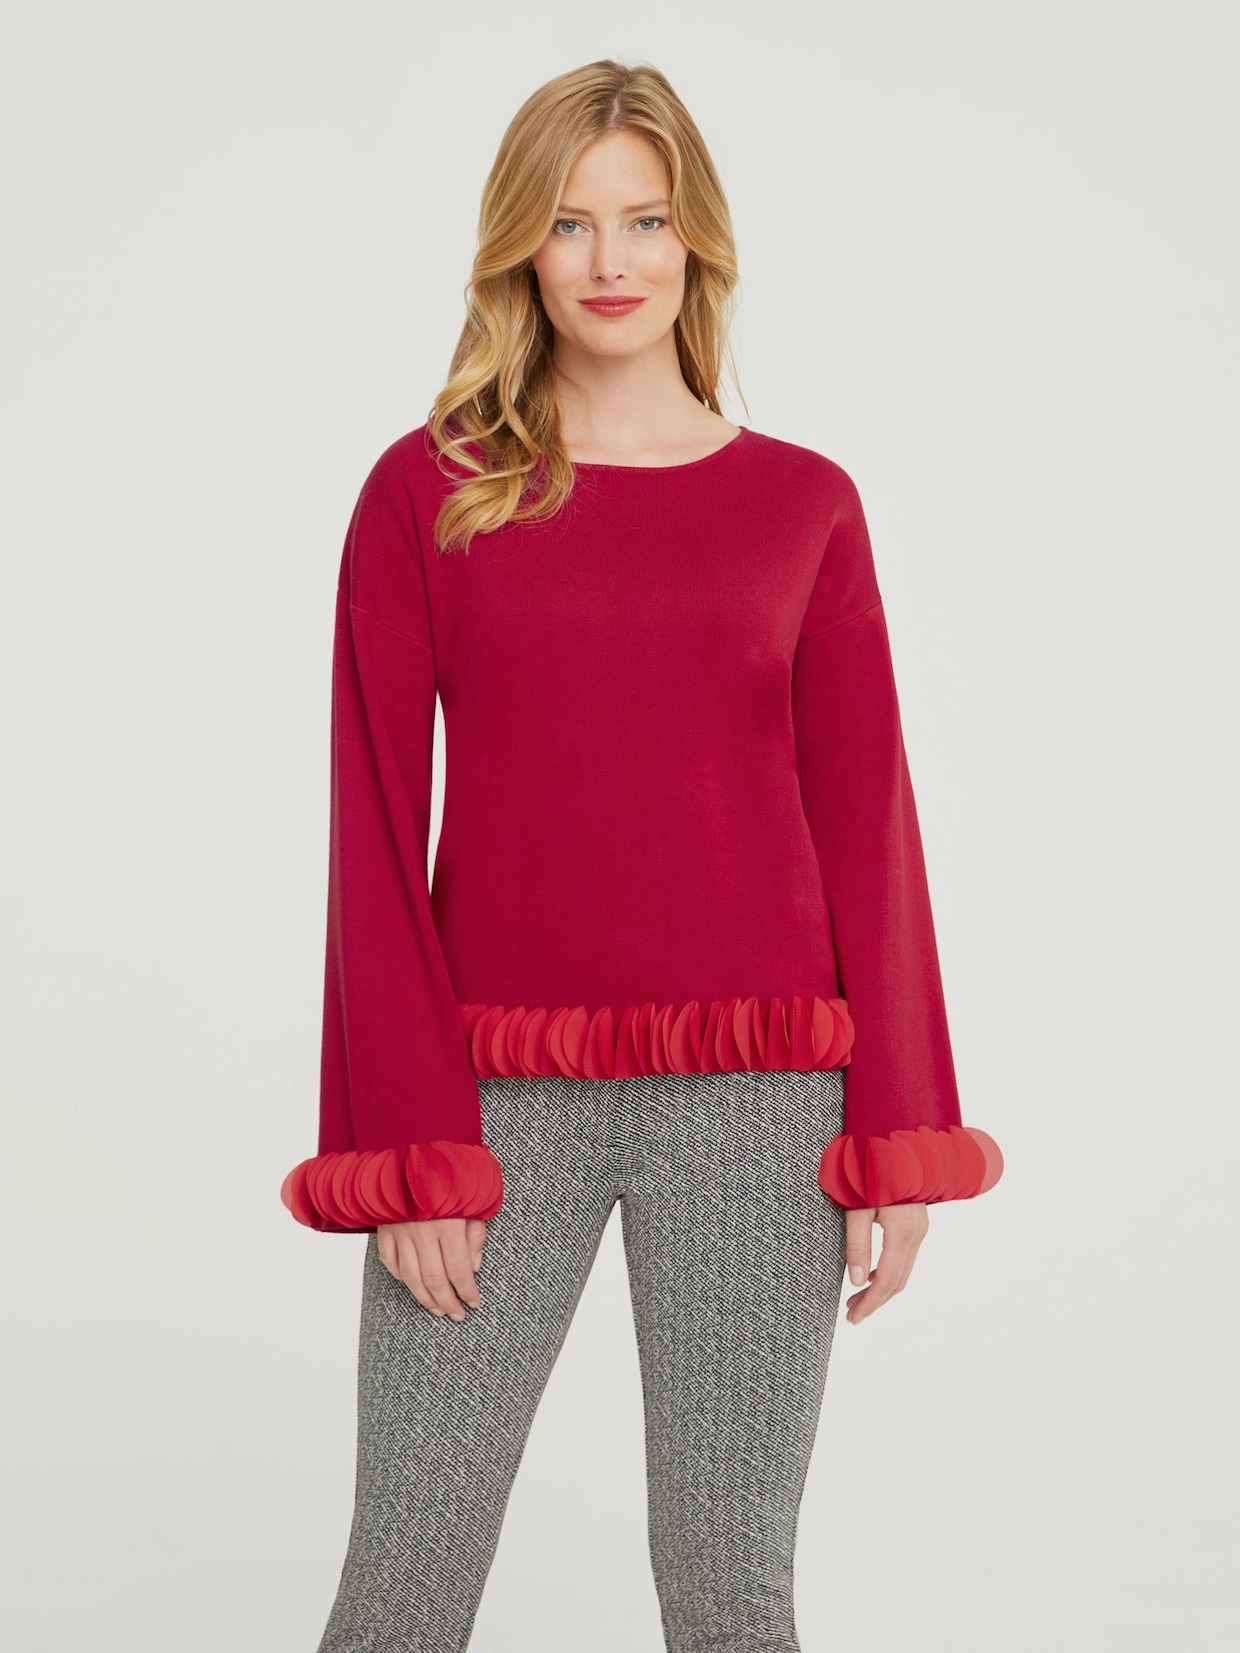 Ashley Brooke Pullover - hibiscus